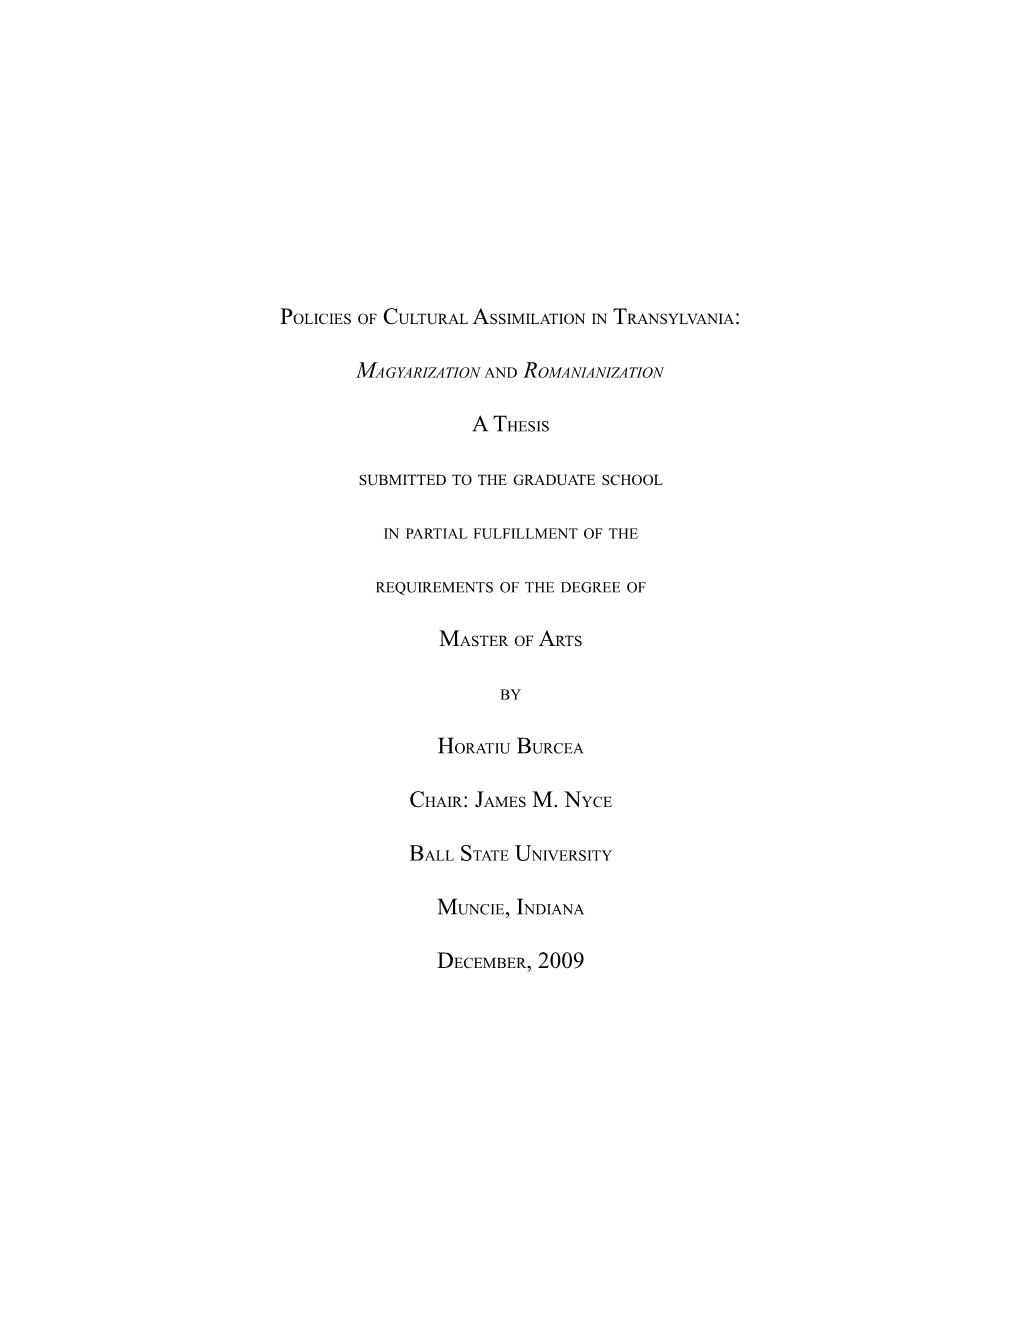 A Thesis Submitted to the Graduate School